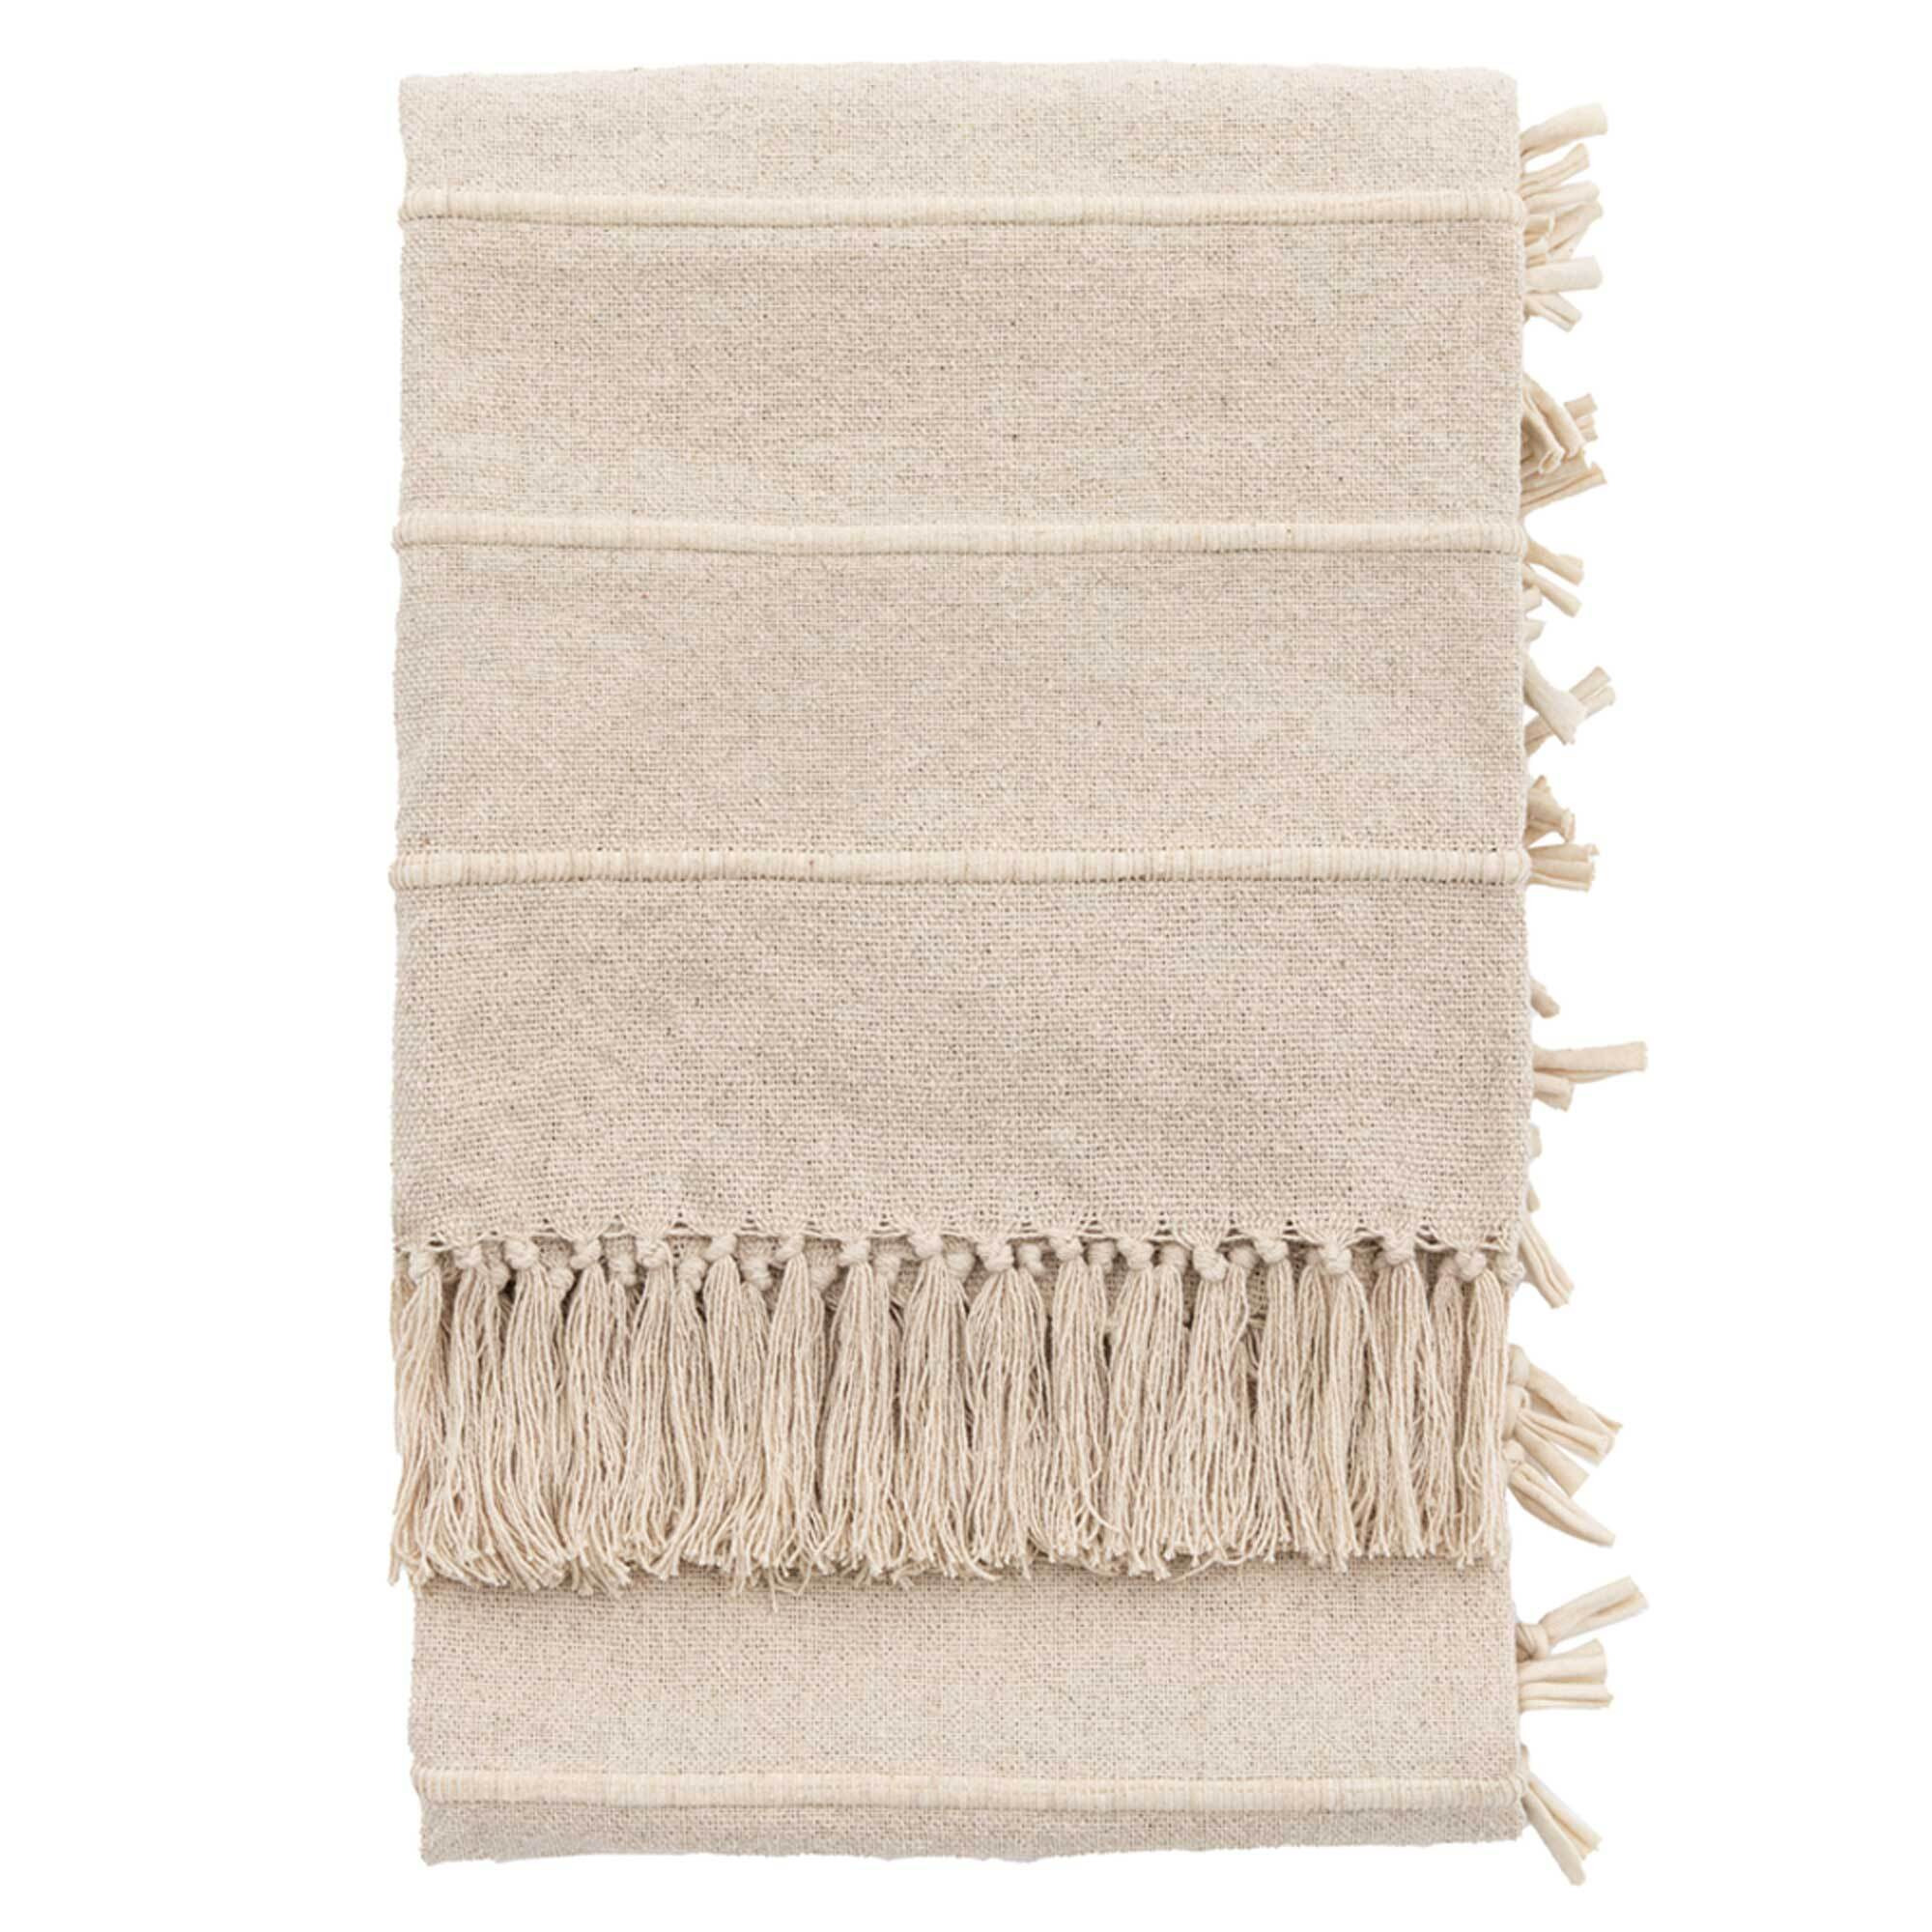 Natural Woven Throw Blanket, Neutral 100% Cotton - Barker & Stonehouse